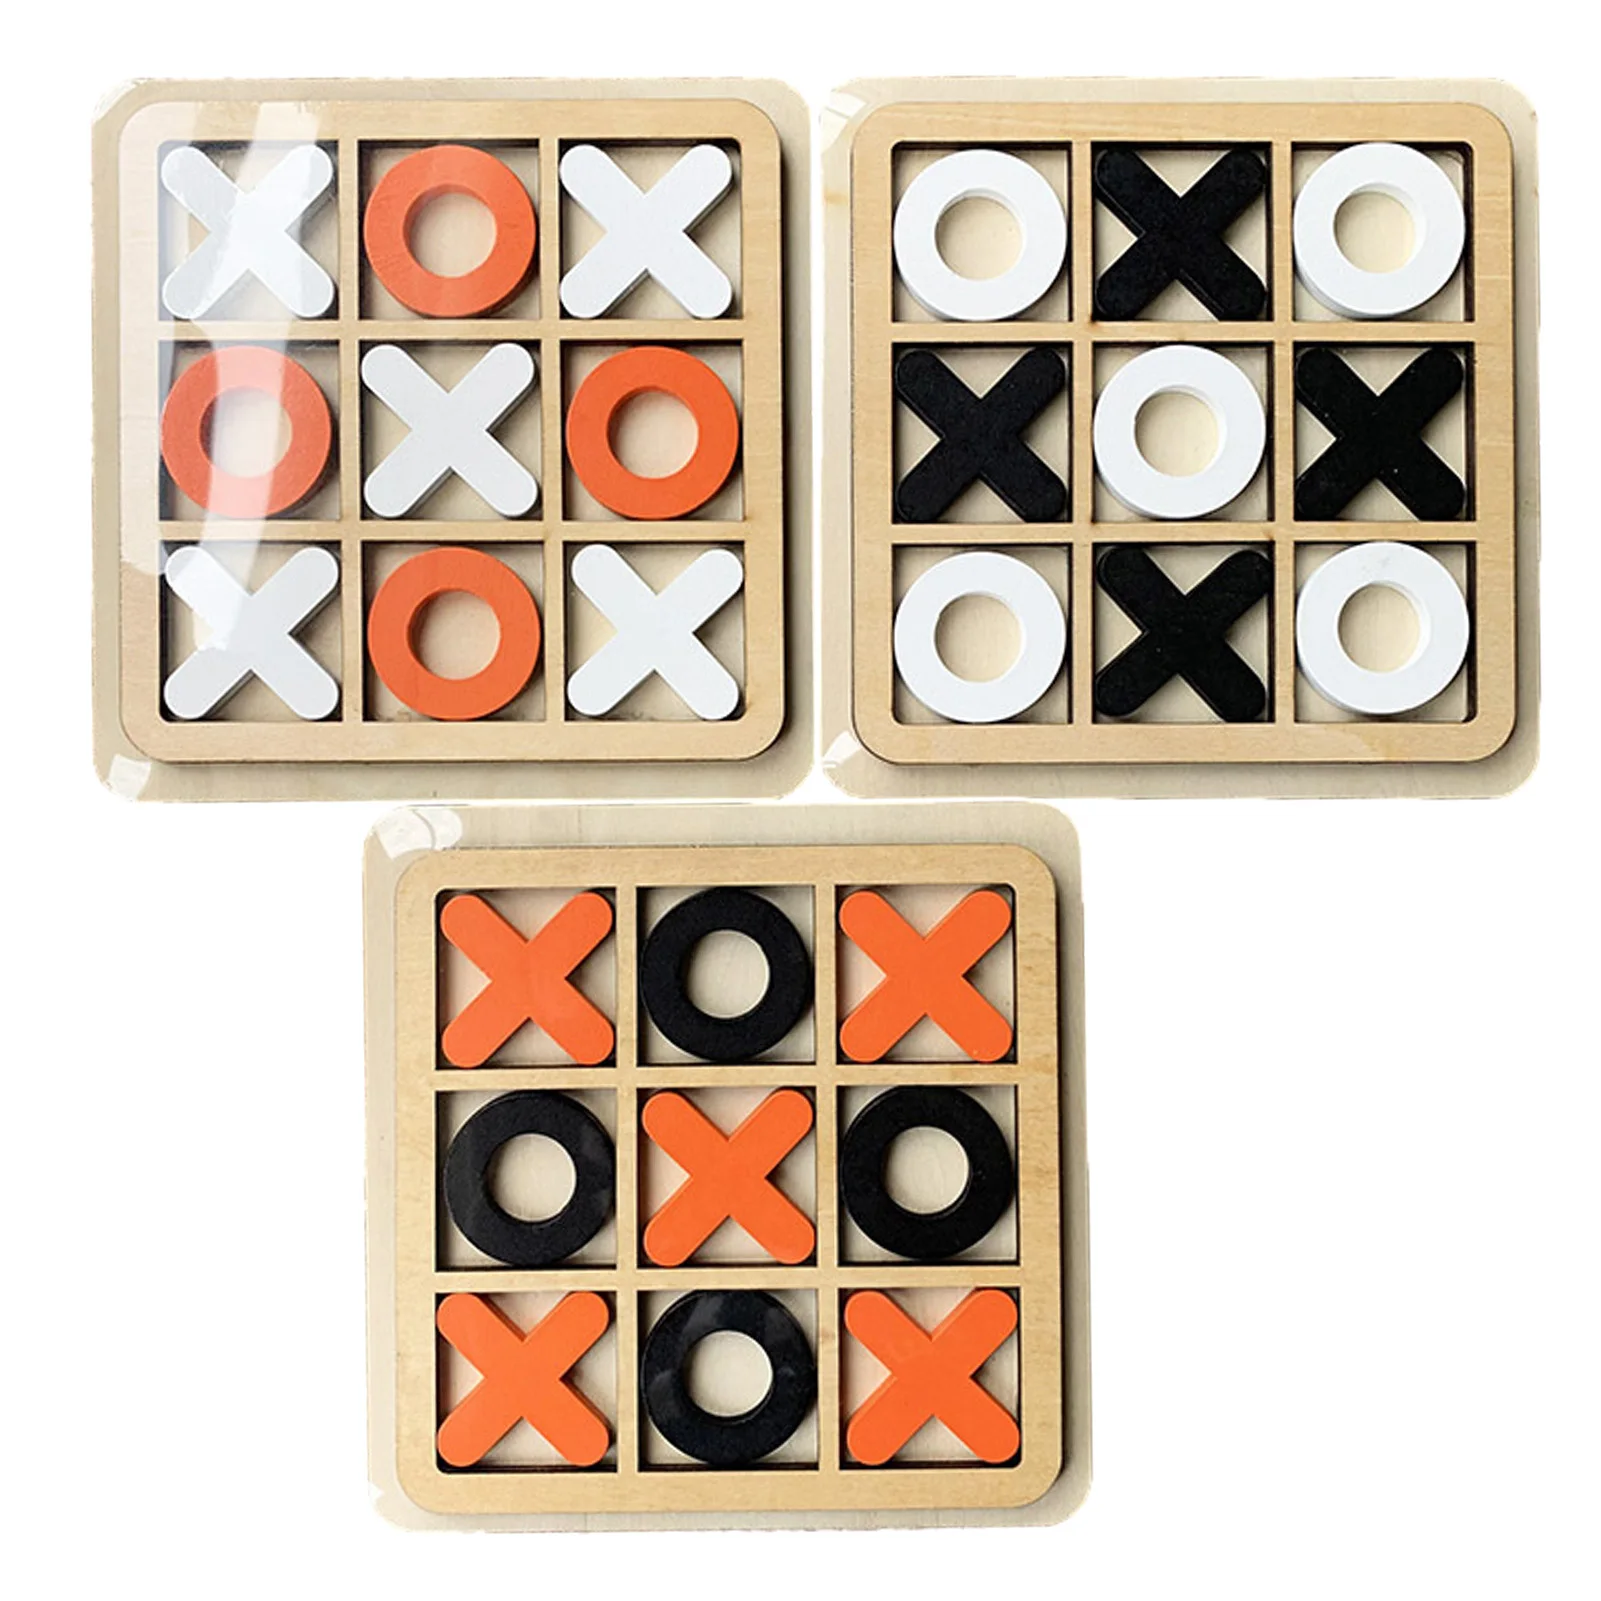 

1PC Parent-Child Interaction Leisure Board Game Tic-Tac-Toe Game OX Chess Eveloping Intelligent Educational Game For Children